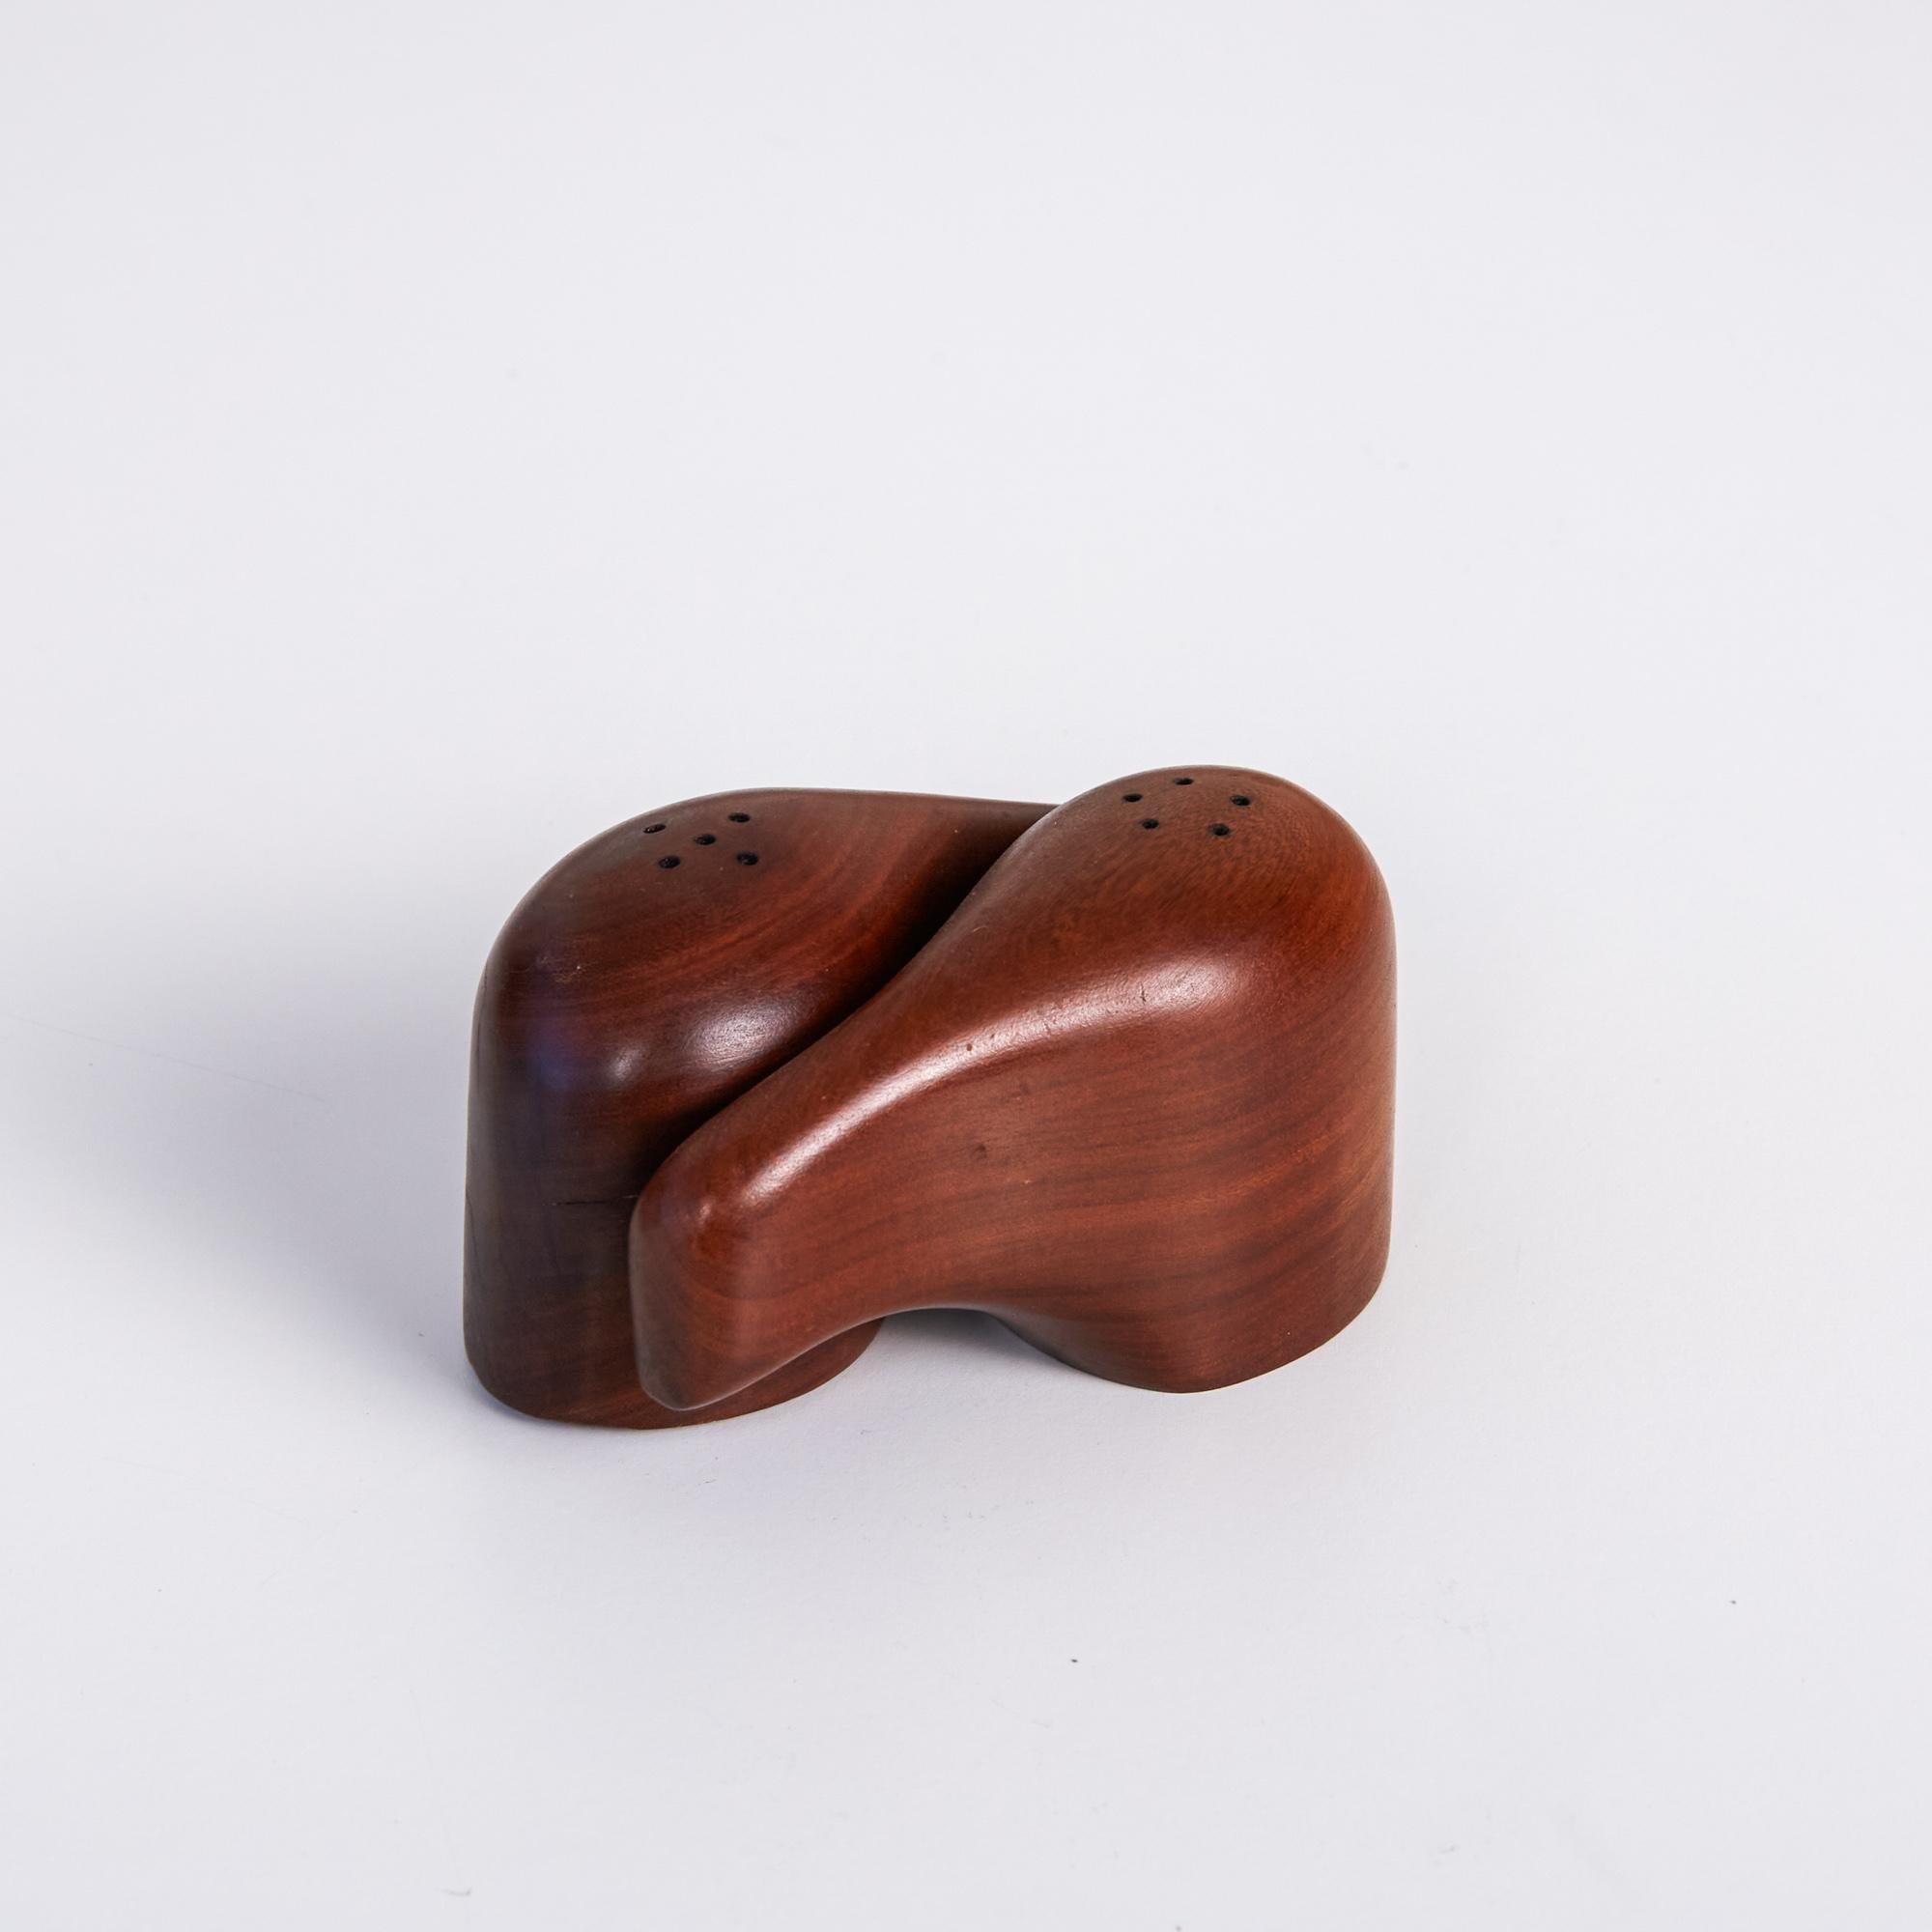 Set of Don Shoemaker for Sen~al salt and pepper shakers. The hand carved Minimalist mahogany shakers feature an interlocking design that, from a glance, makes the two pieces form together as a single object. Each piece features five expertly drilled